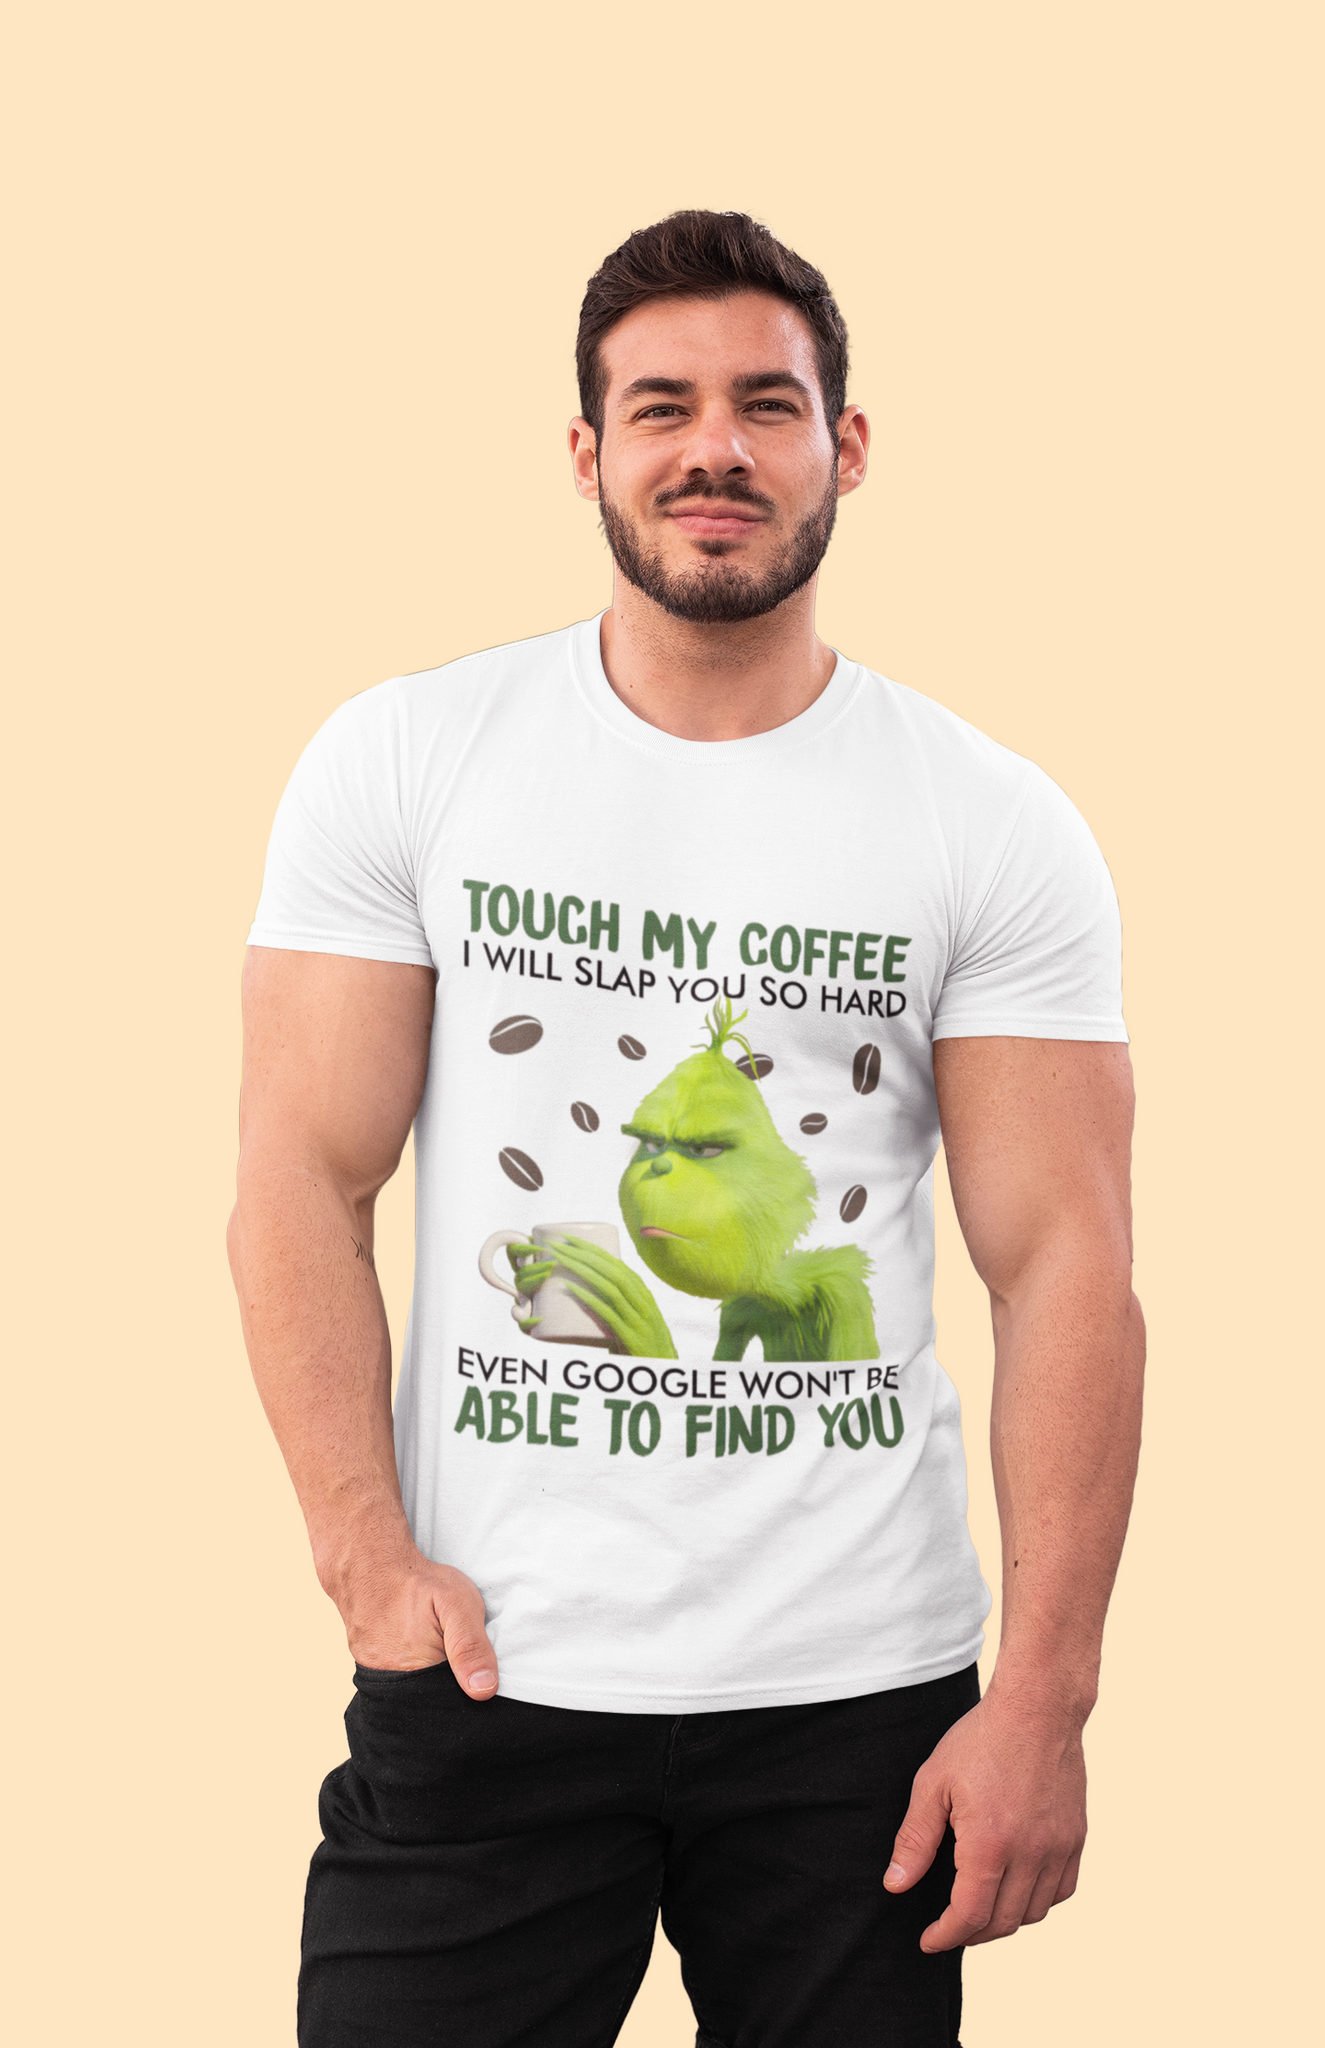 Grinch T Shirt, Touch My Coffee I Will Slap You So Hard Tshirt, Even Google Wont Be Able To Find You Shirt, Christmas Gifts